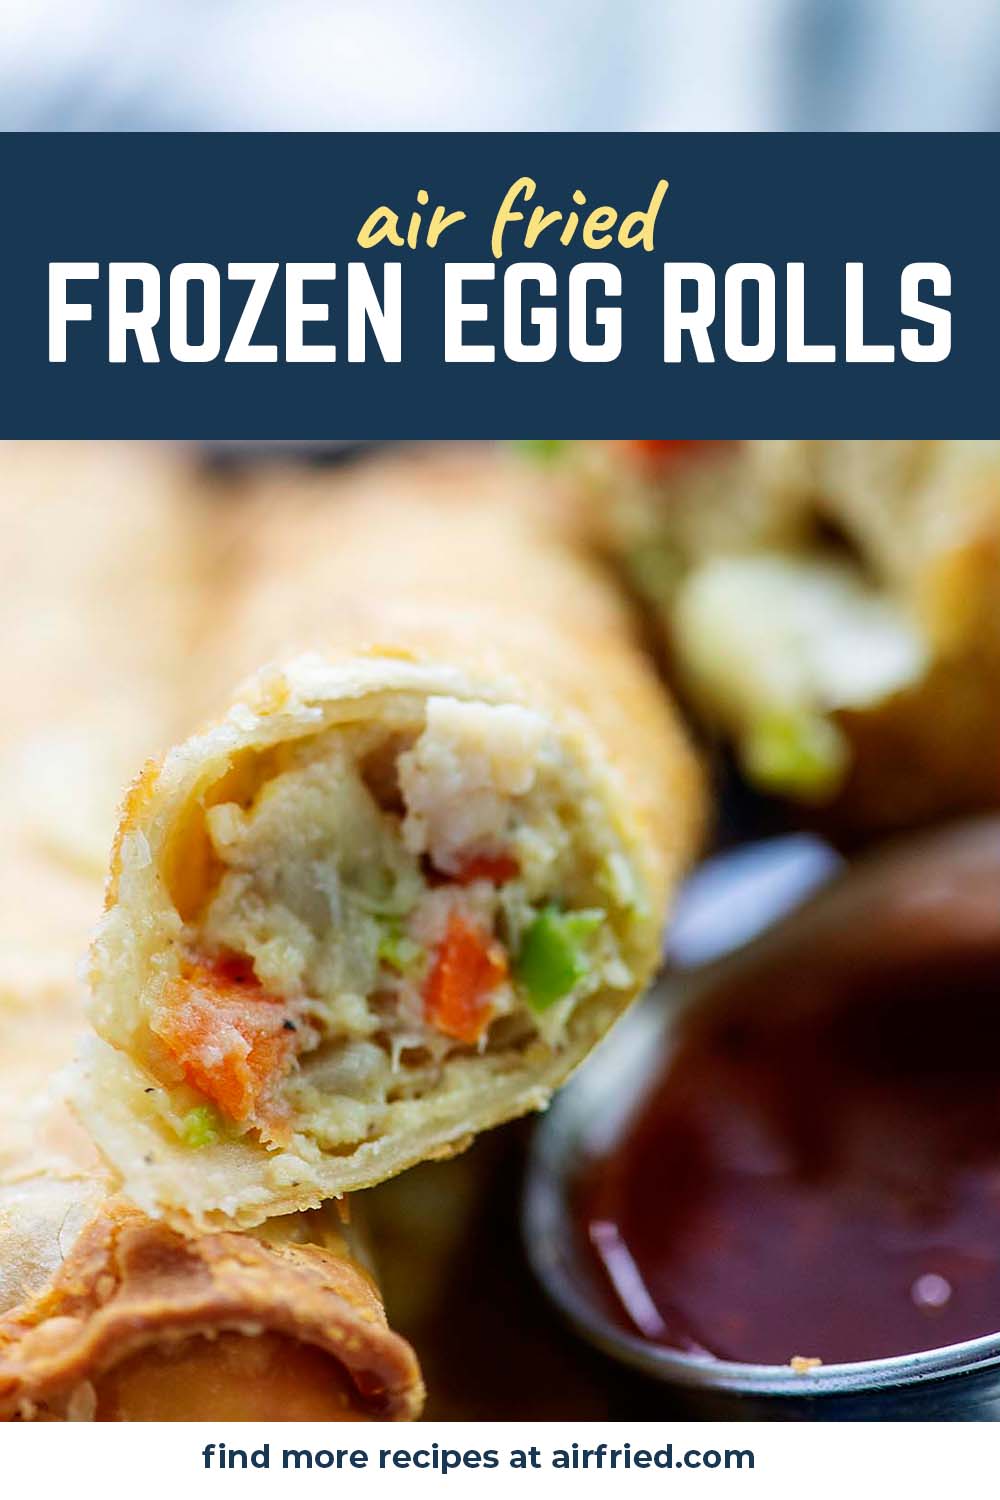 Frozen egg rolls have never been more worth it now that we can cook them perfectly in an air fryer!